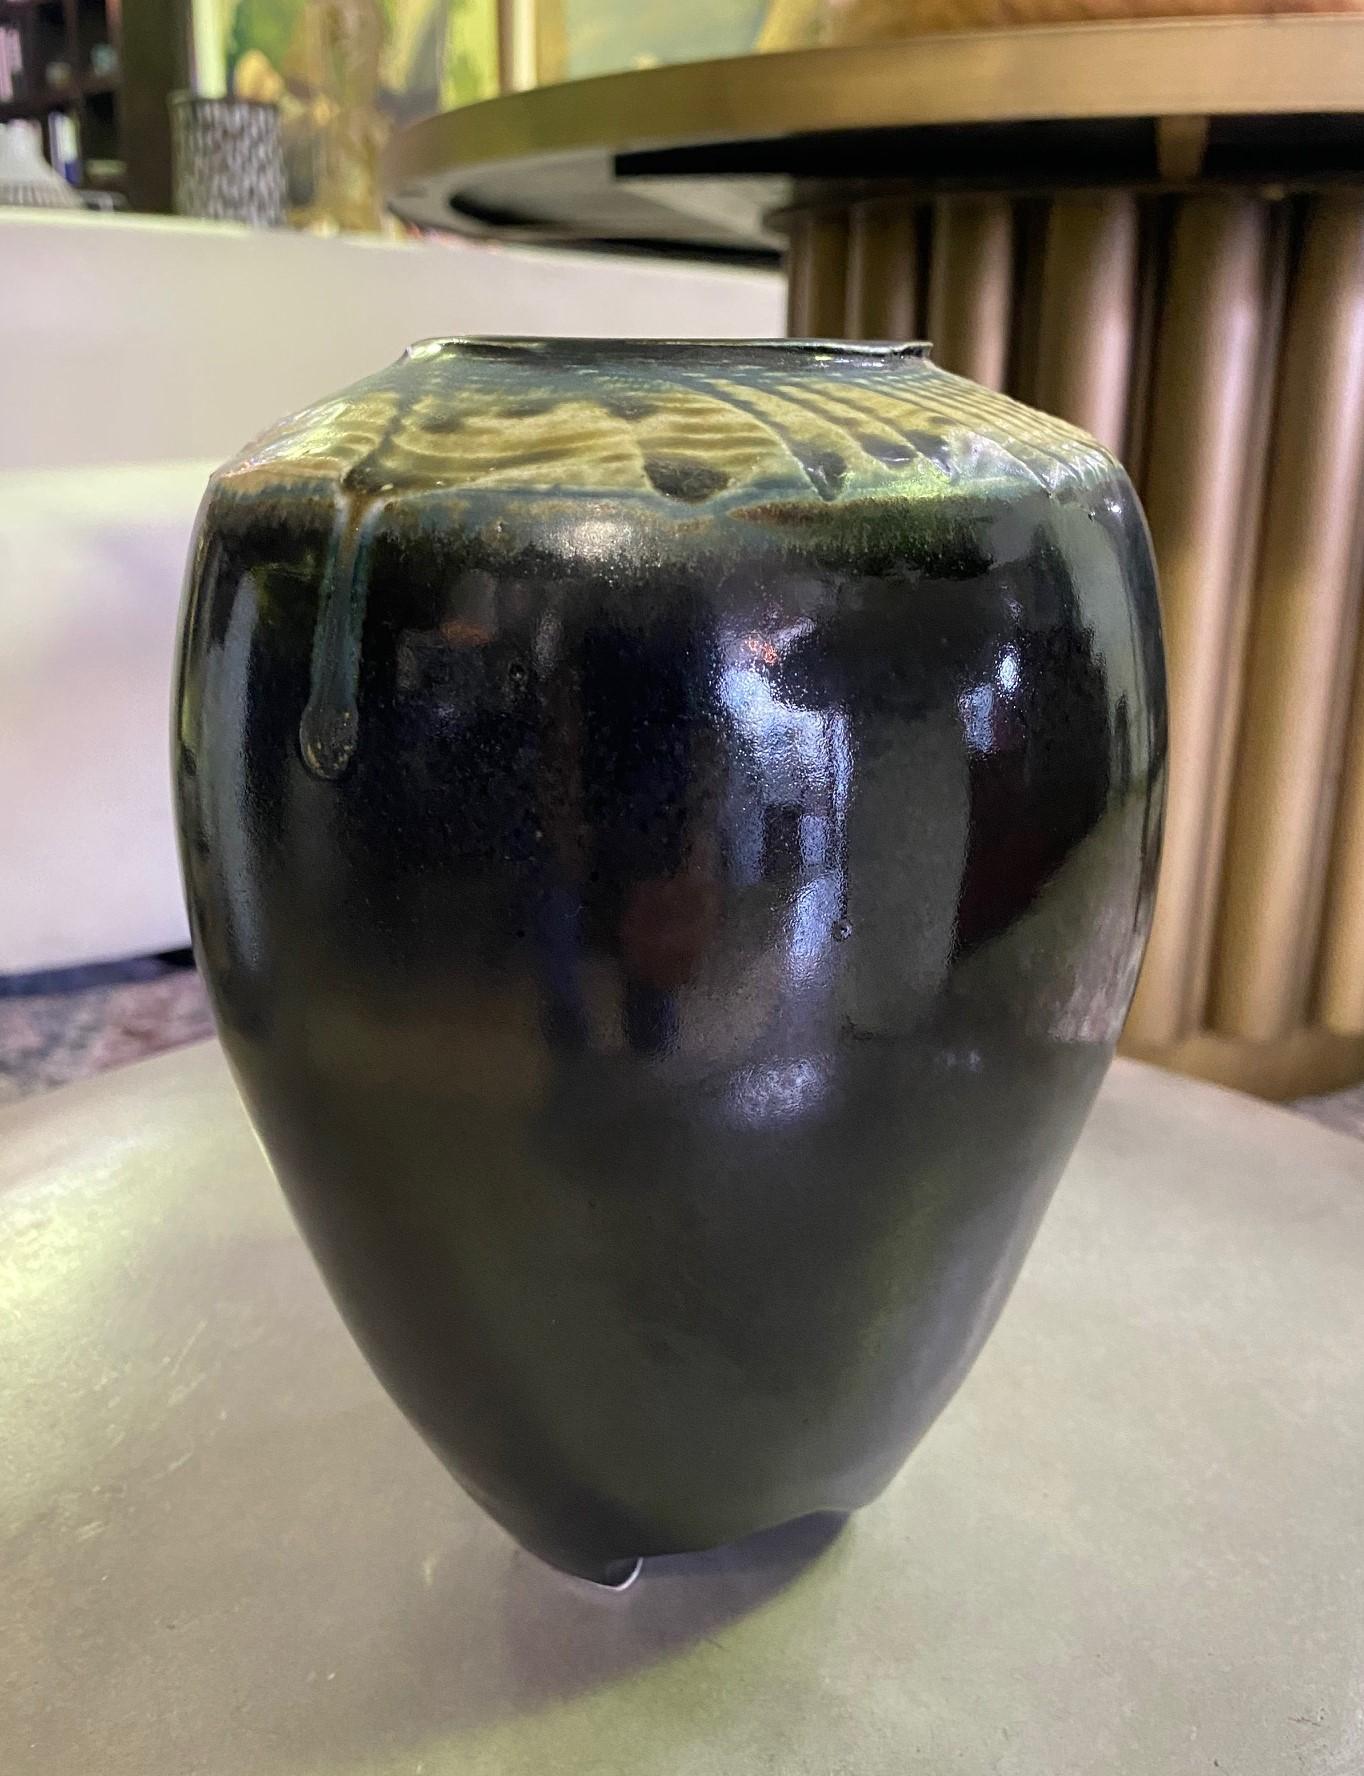 A suberbly crafted, beautifully, and darkly glazed vase by Southern California studio potter/ artist Neil Moss. The workmanship is truly exquisite. 

Moss' work is collected by various institutions and museums. He was featured by the Pasadena Art